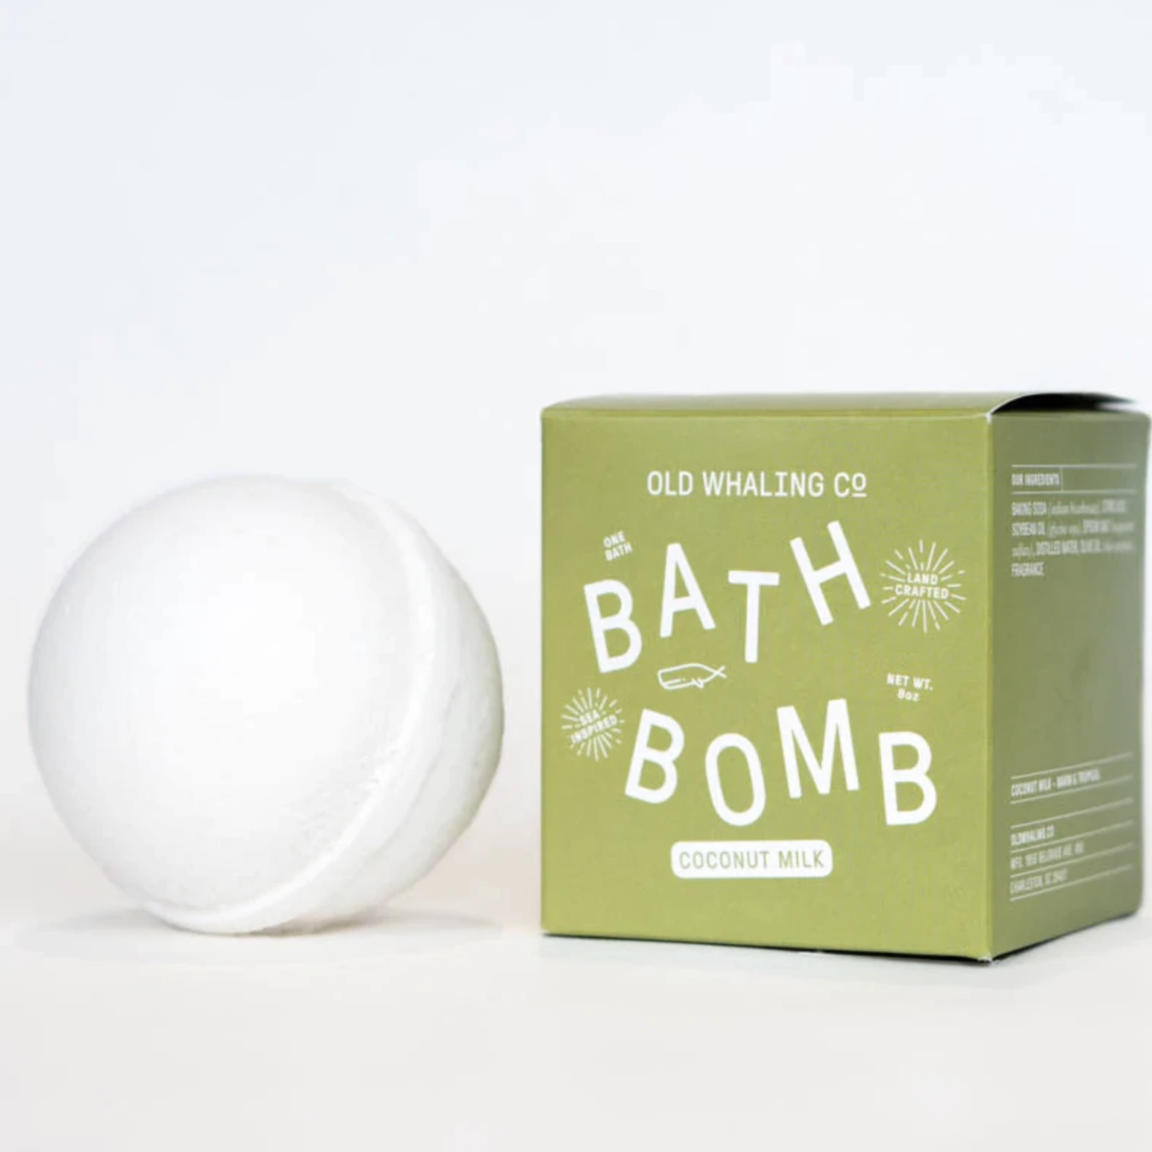 White bath bomb on the left and green cube box to the right.